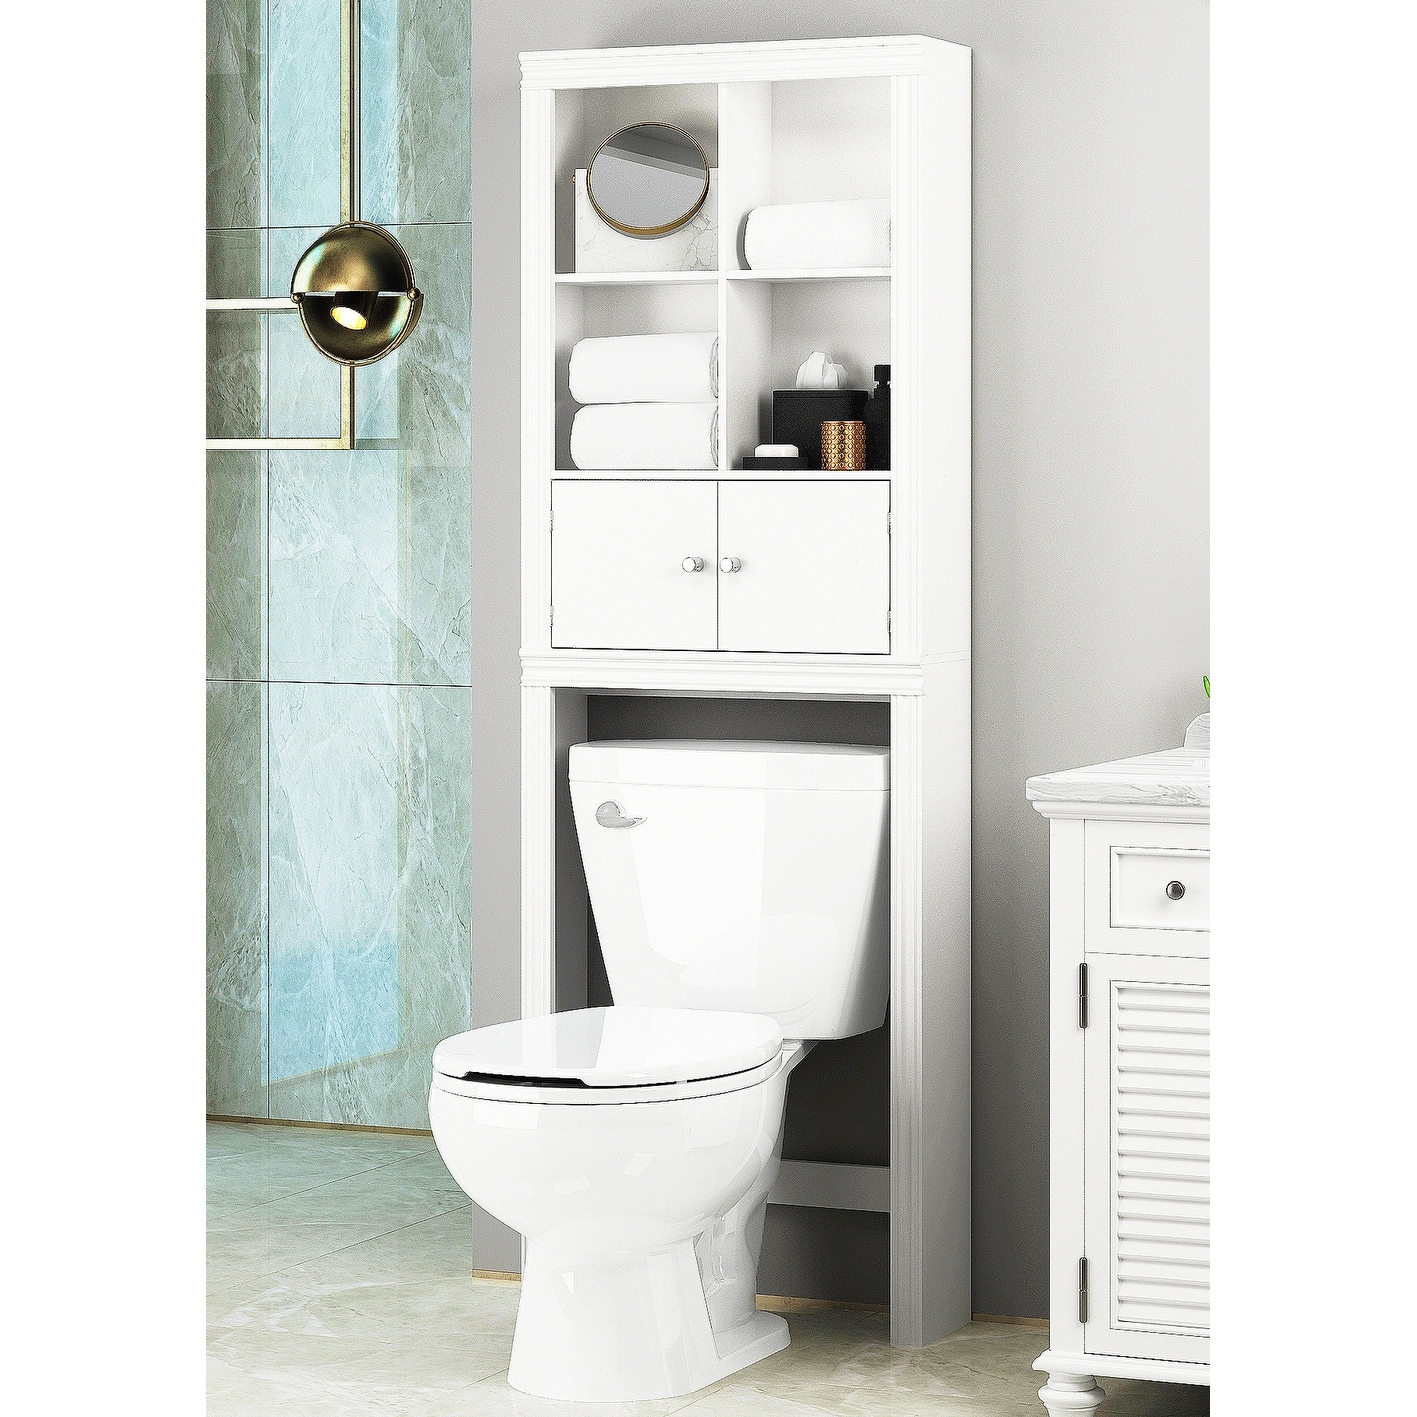 https://ak1.ostkcdn.com/images/products/is/images/direct/015c68f2f5f5be4c7ff4931c57b63e128c4bacba/Spirich-Home-Bathroom-Shelf-Over-The-Toilet%2C-Bathroom-Cabinet-Organizer-Over-Toilet%2C-Space-Saver-Cabinet-Storage-%28White%29.jpg